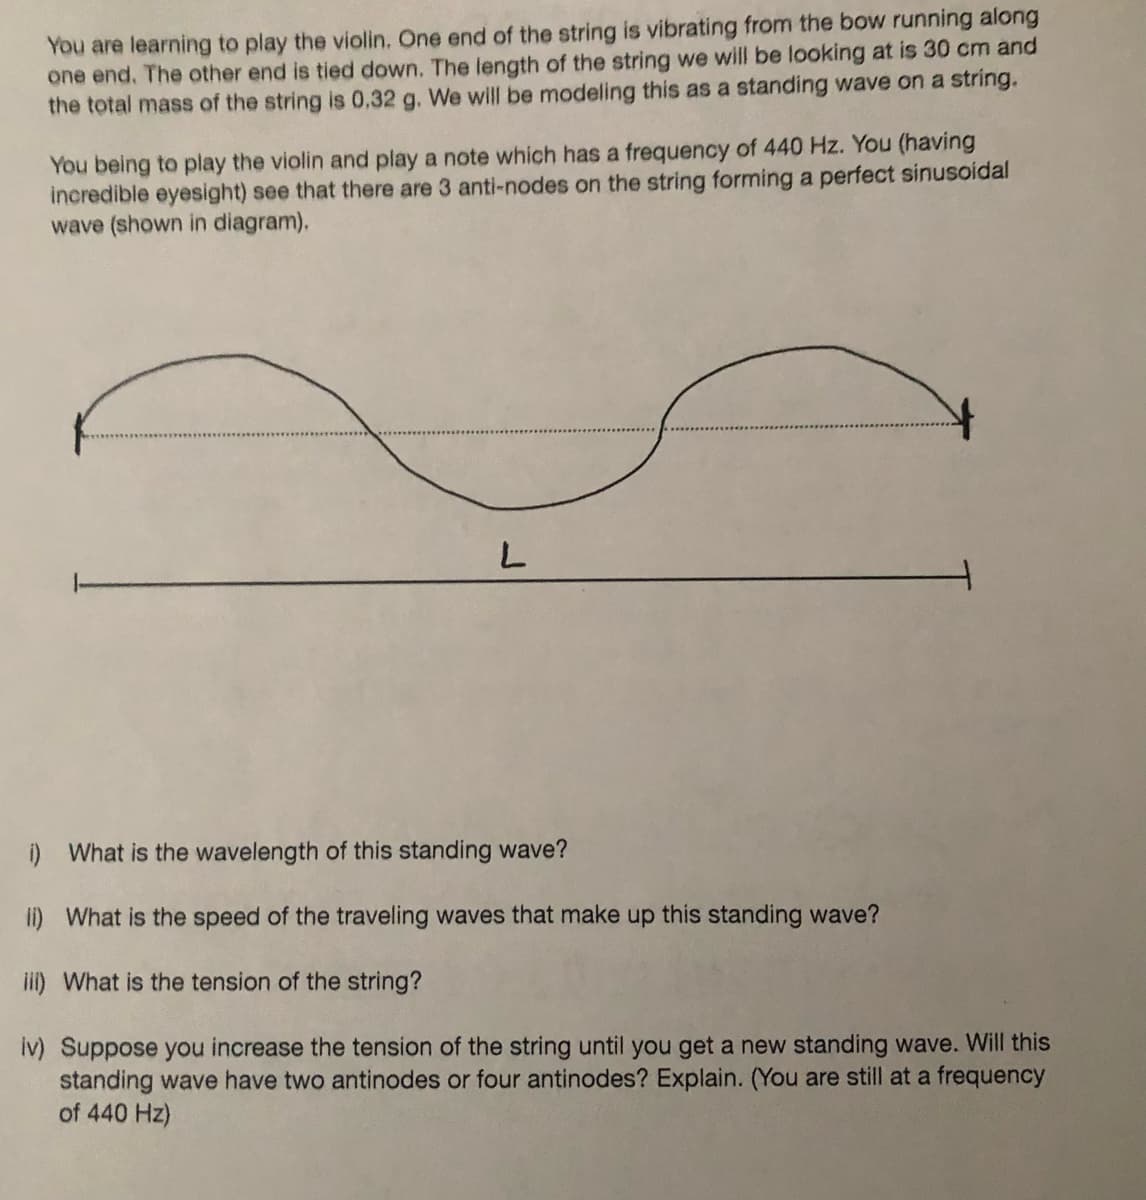 You are learning to play the violin. One end of the string is vibrating from the bow running along
one end. The other end is tied down. The length of the string we will be looking at is 30 cm and
the total mass of the string is 0,32 g. We will be modeling this as a standing wave on a string.
You being to play the violin and play a note which has a frequency of 440 Hz. You (having
incredible eyesight) see that there are 3 anti-nodes on the string forming a perfect sinusoidal
wave (shown in diagram).
L
i) What is the wavelength of this standing wave?
ii) What is the speed of the traveling waves that make up this standing wave?
iii) What is the tension of the string?
iv) Suppose you increase the tension of the string until you get a new standing wave. Will this
standing wave have two antinodes or four antinodes? Explain. (You are still at a frequency
of 440 Hz)